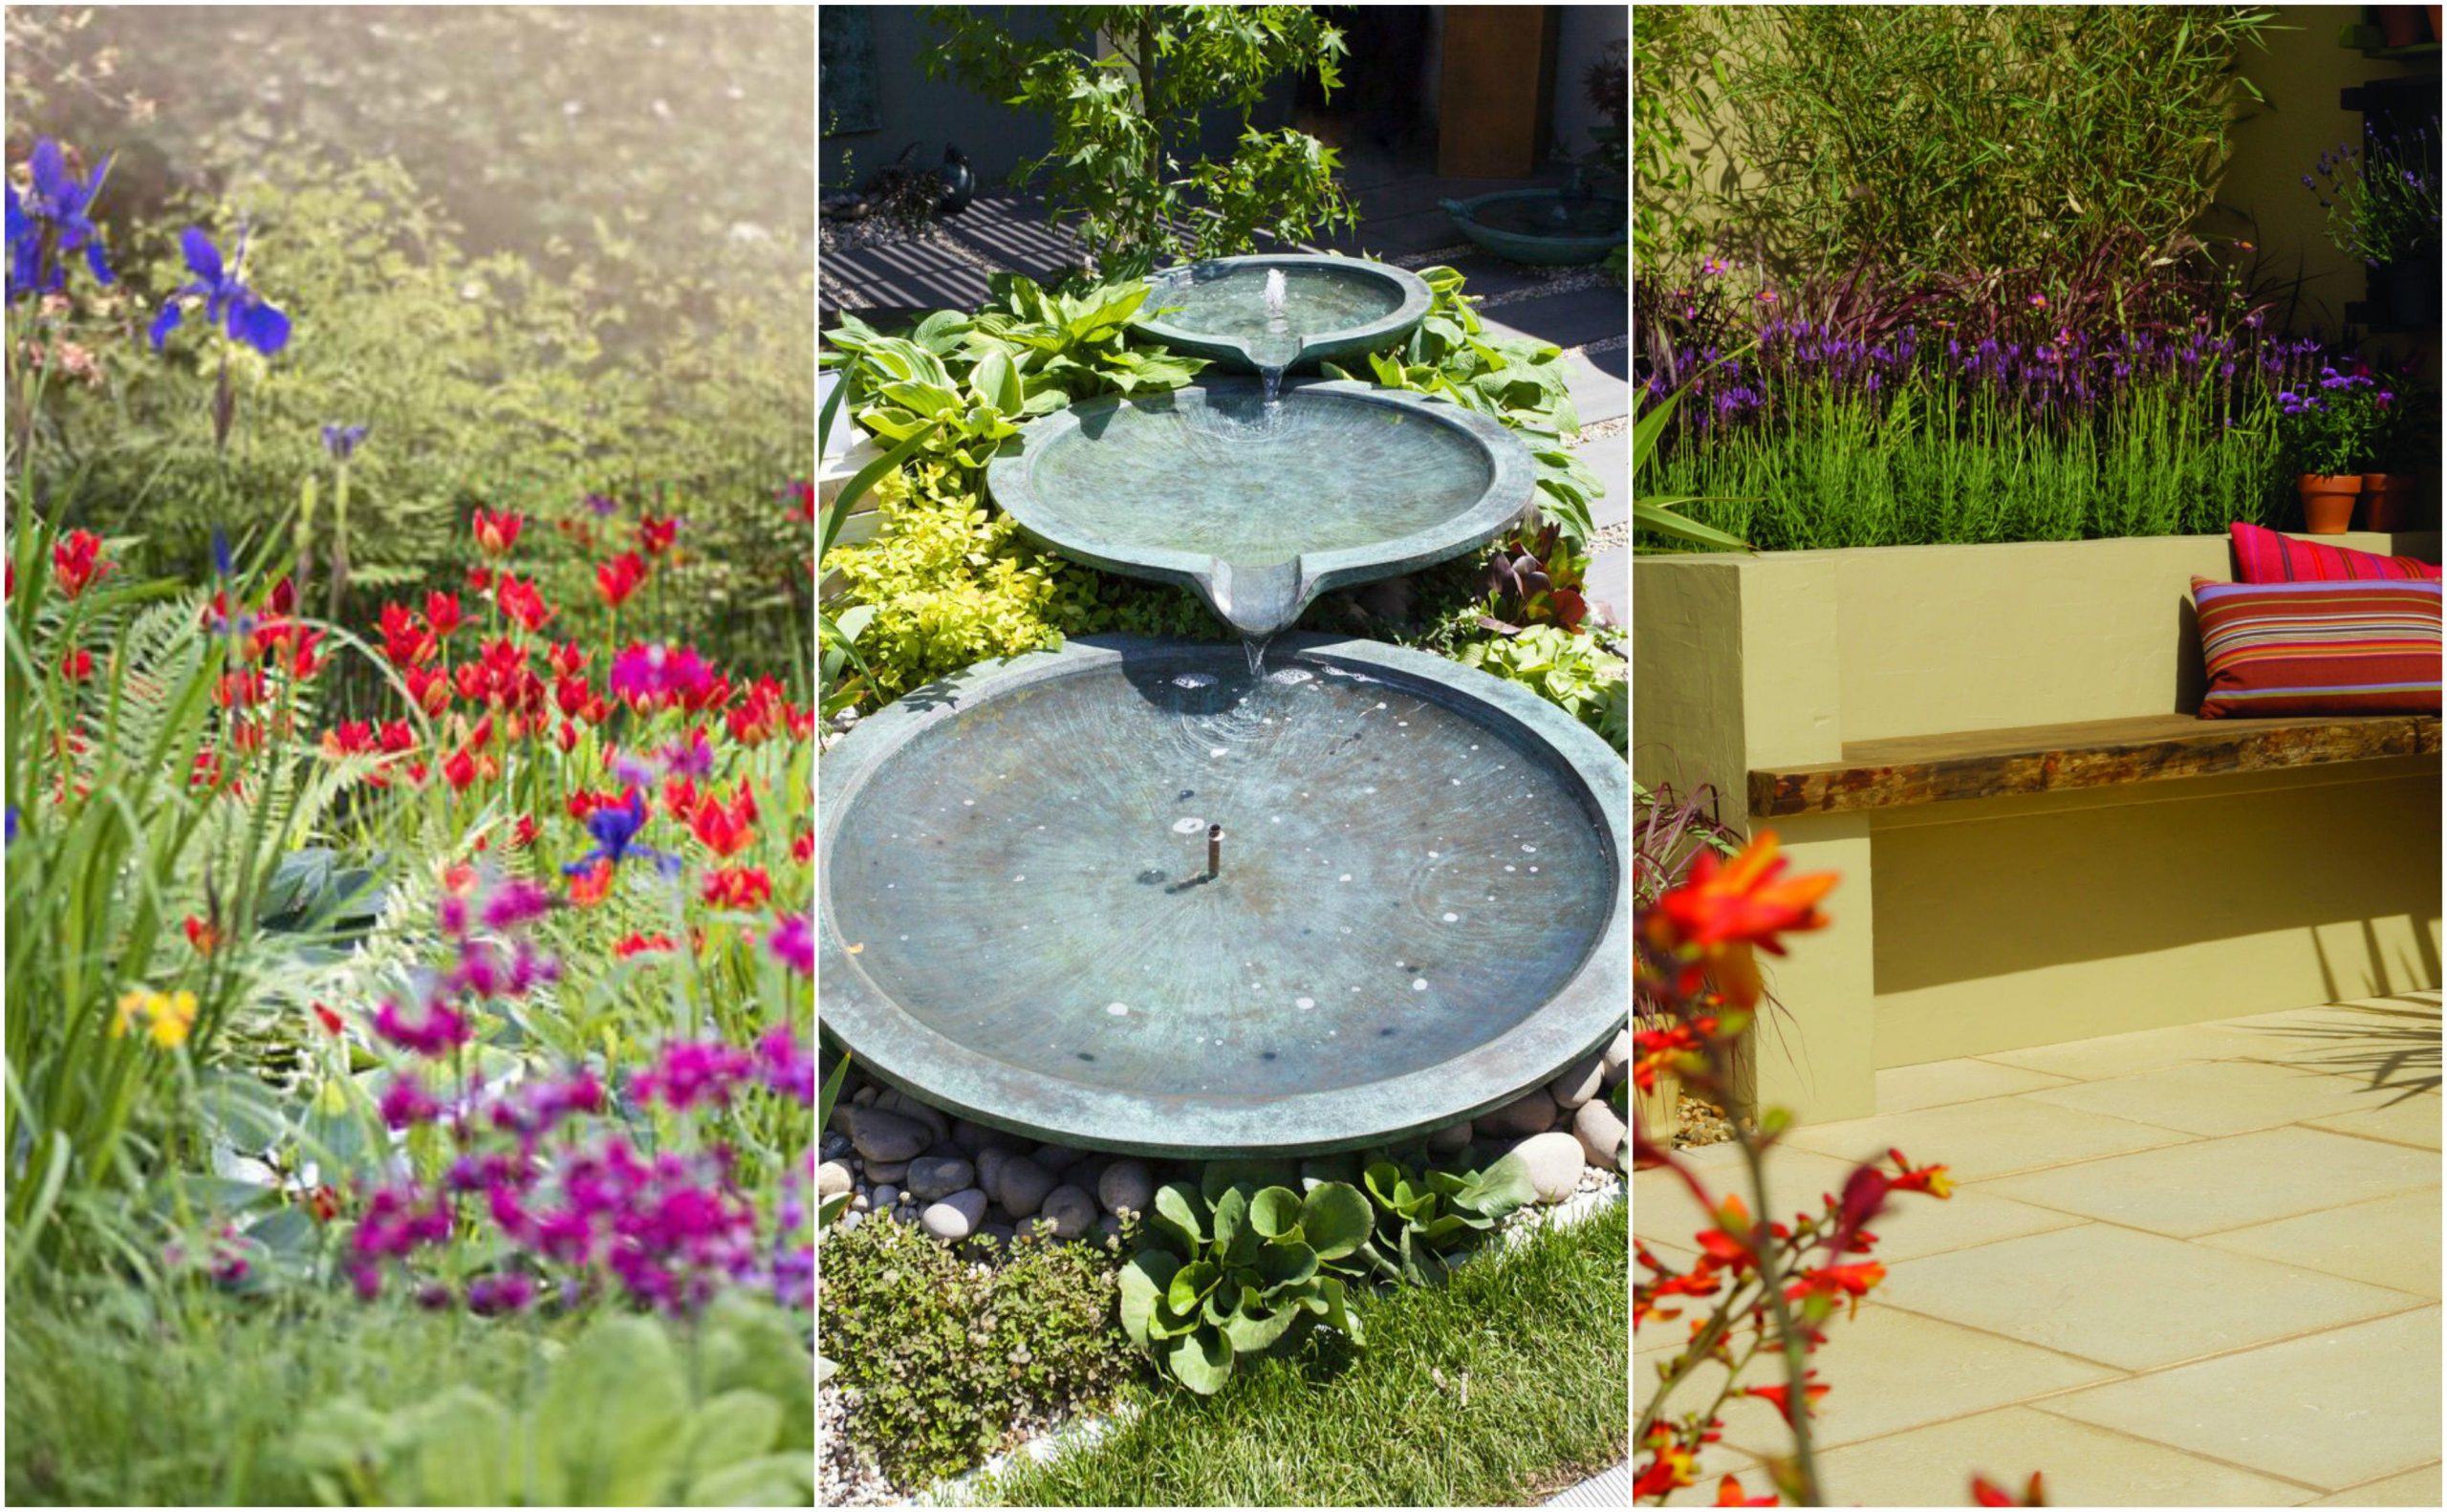 Simphome.com top 10 garden design ideas to make the best of your outdoor space